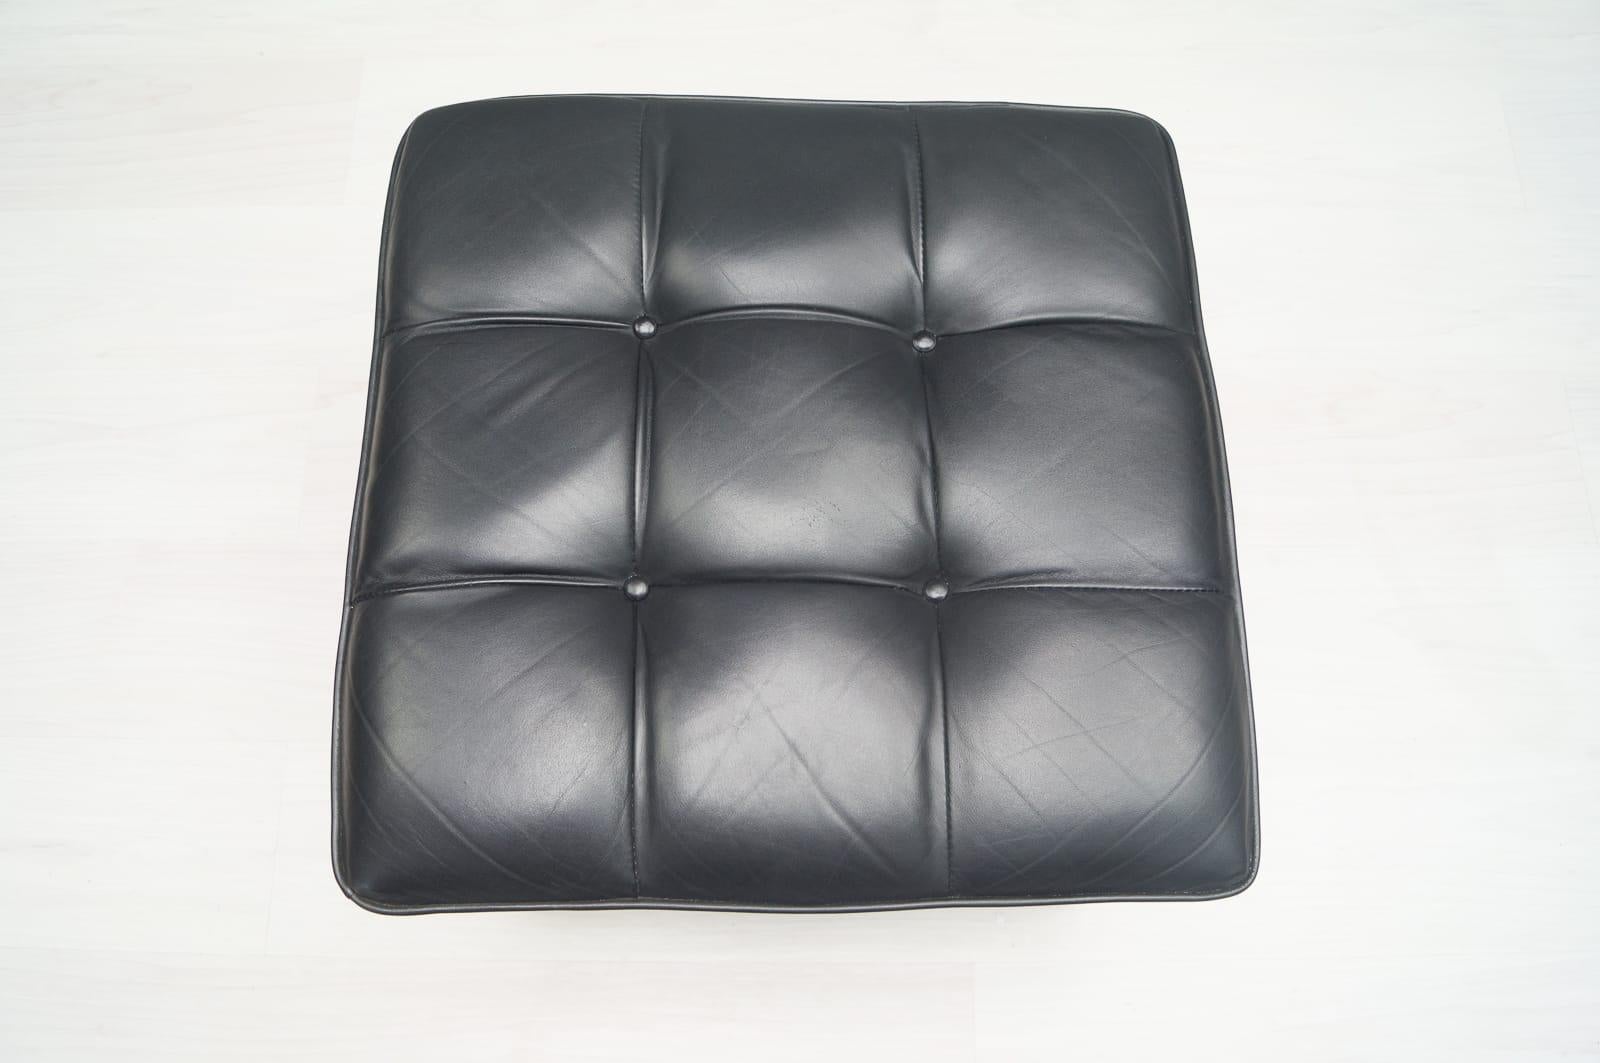 Mid-20th Century Pair of Black Leather Constanze Poufs by Johannes Spalt for Wittmann, 1960s